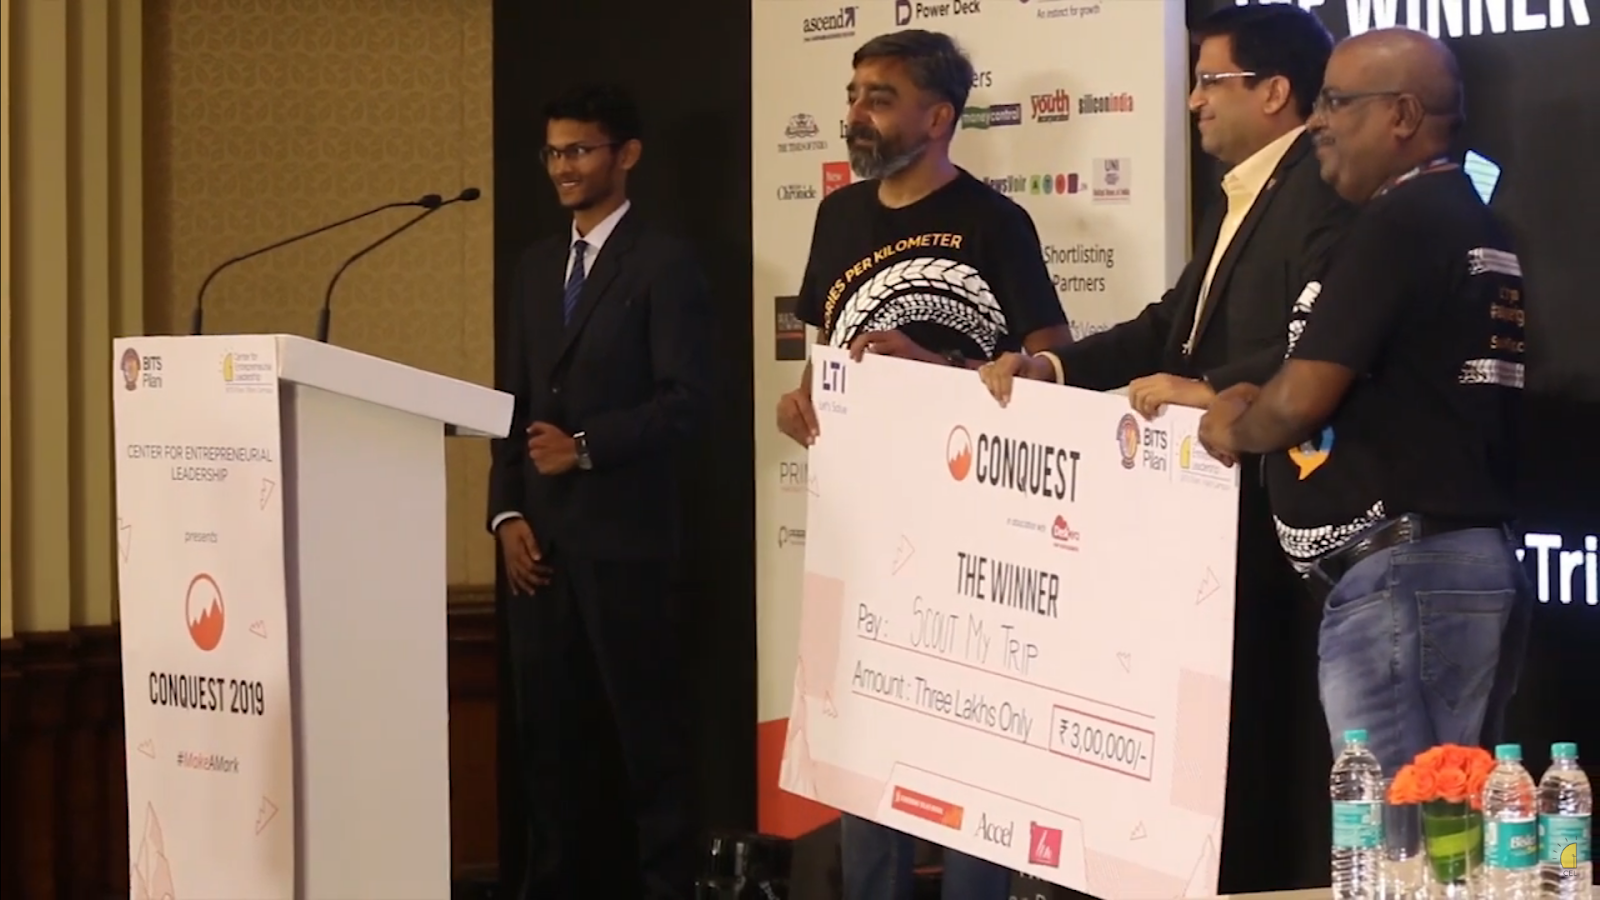 BITS Pilani's Startup Accelerator Conquest hosts its Demo Day in Bangalore